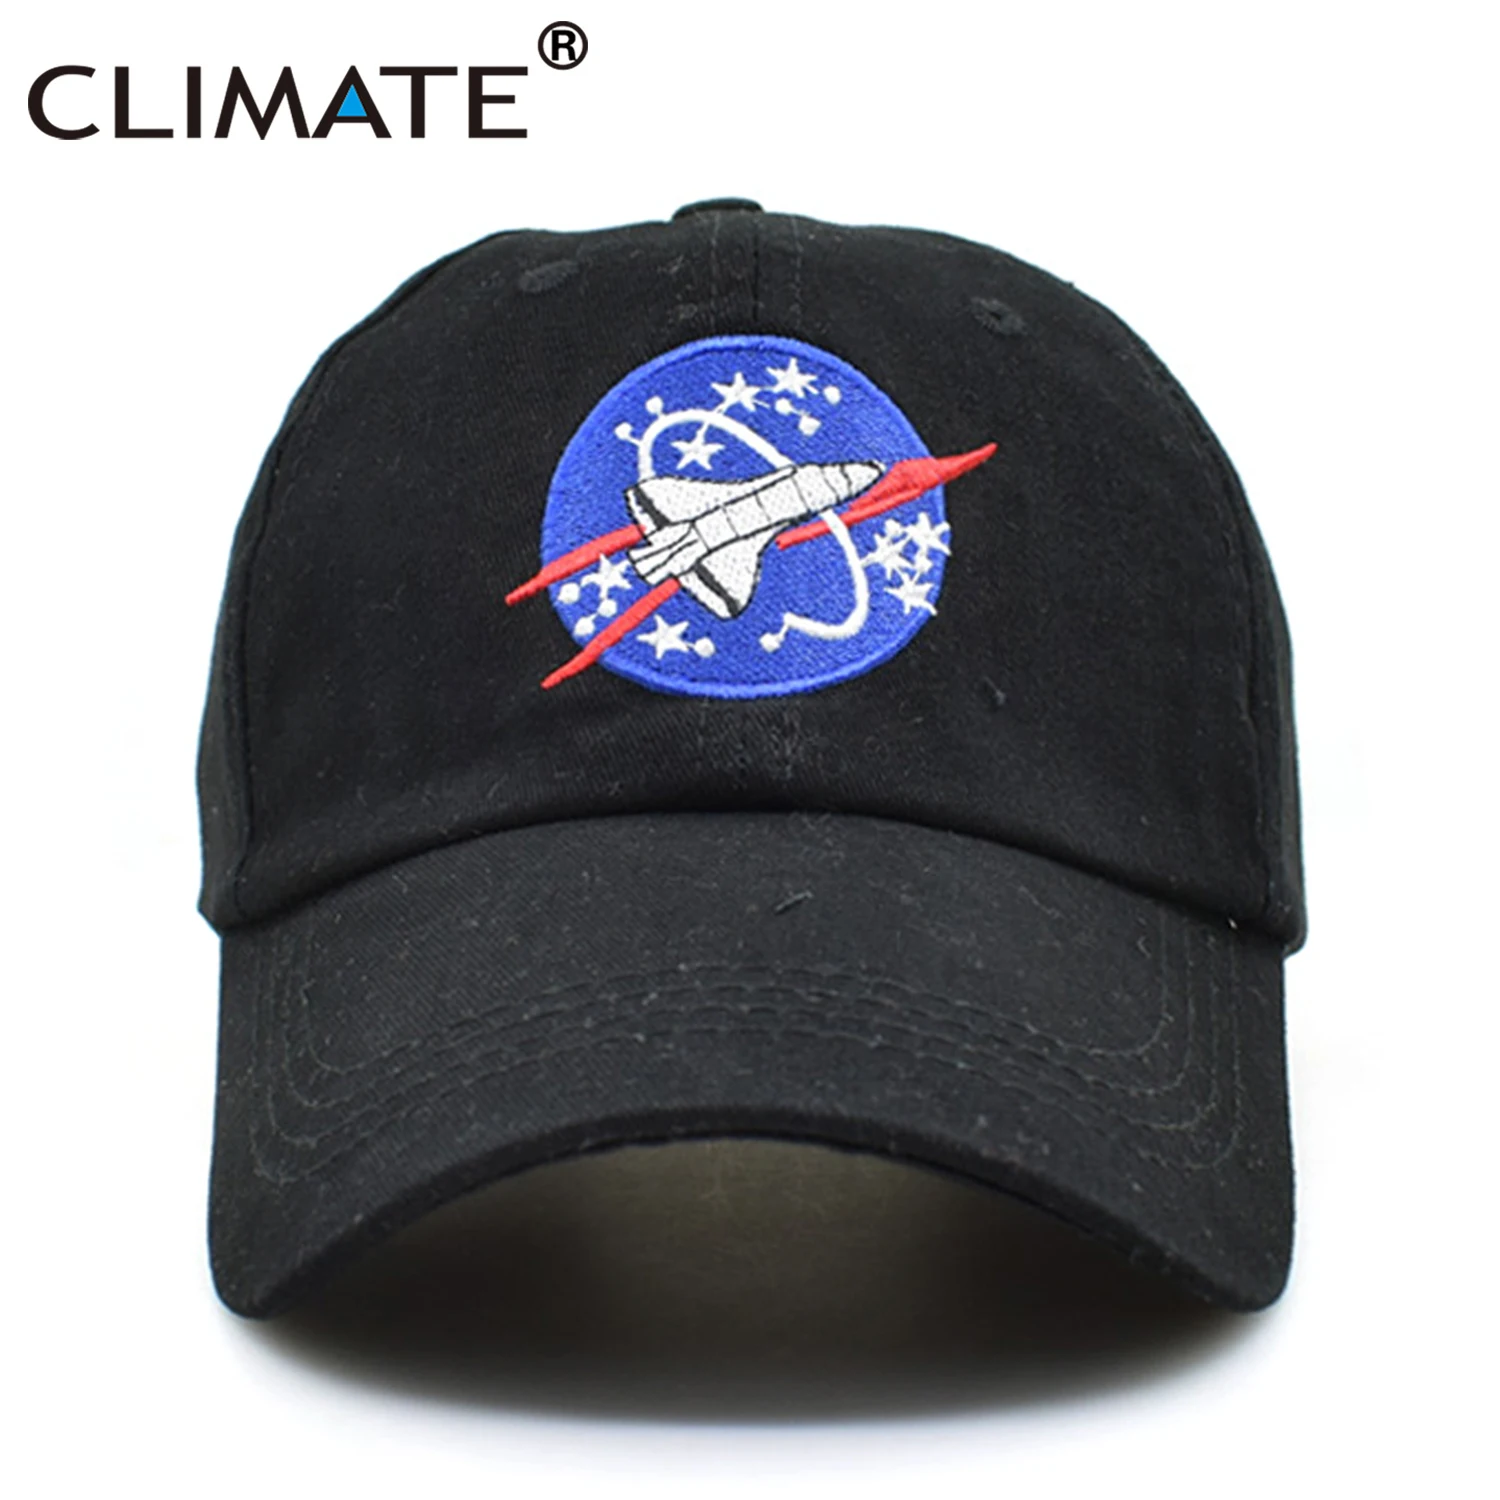 CLIMATE Women Men New Black Baseball Caps Spacex Outer space Fans ...